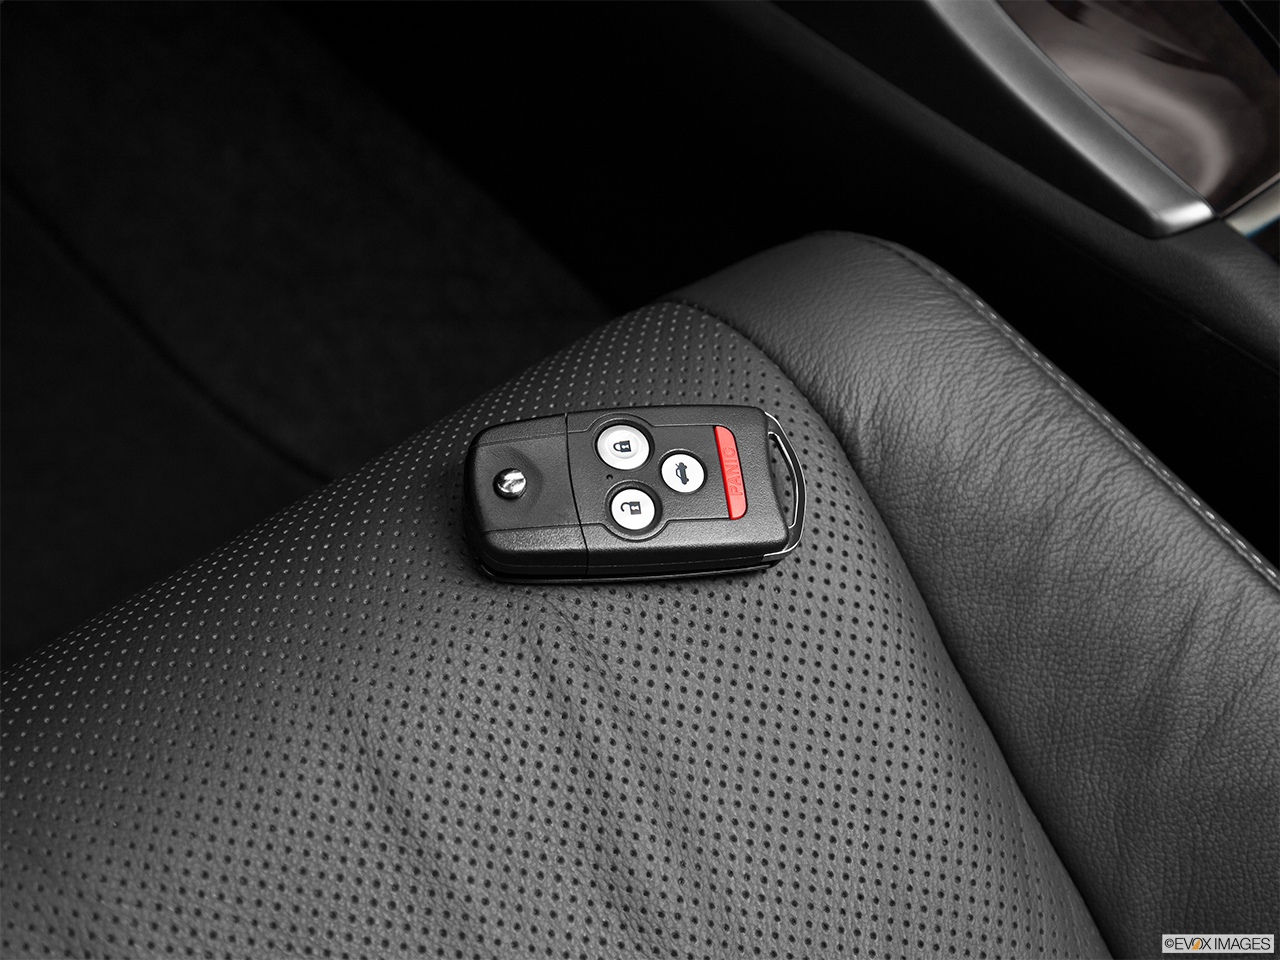 2011 Acura TSX TSX 5-speed Automatic Key fob on driver's seat. 